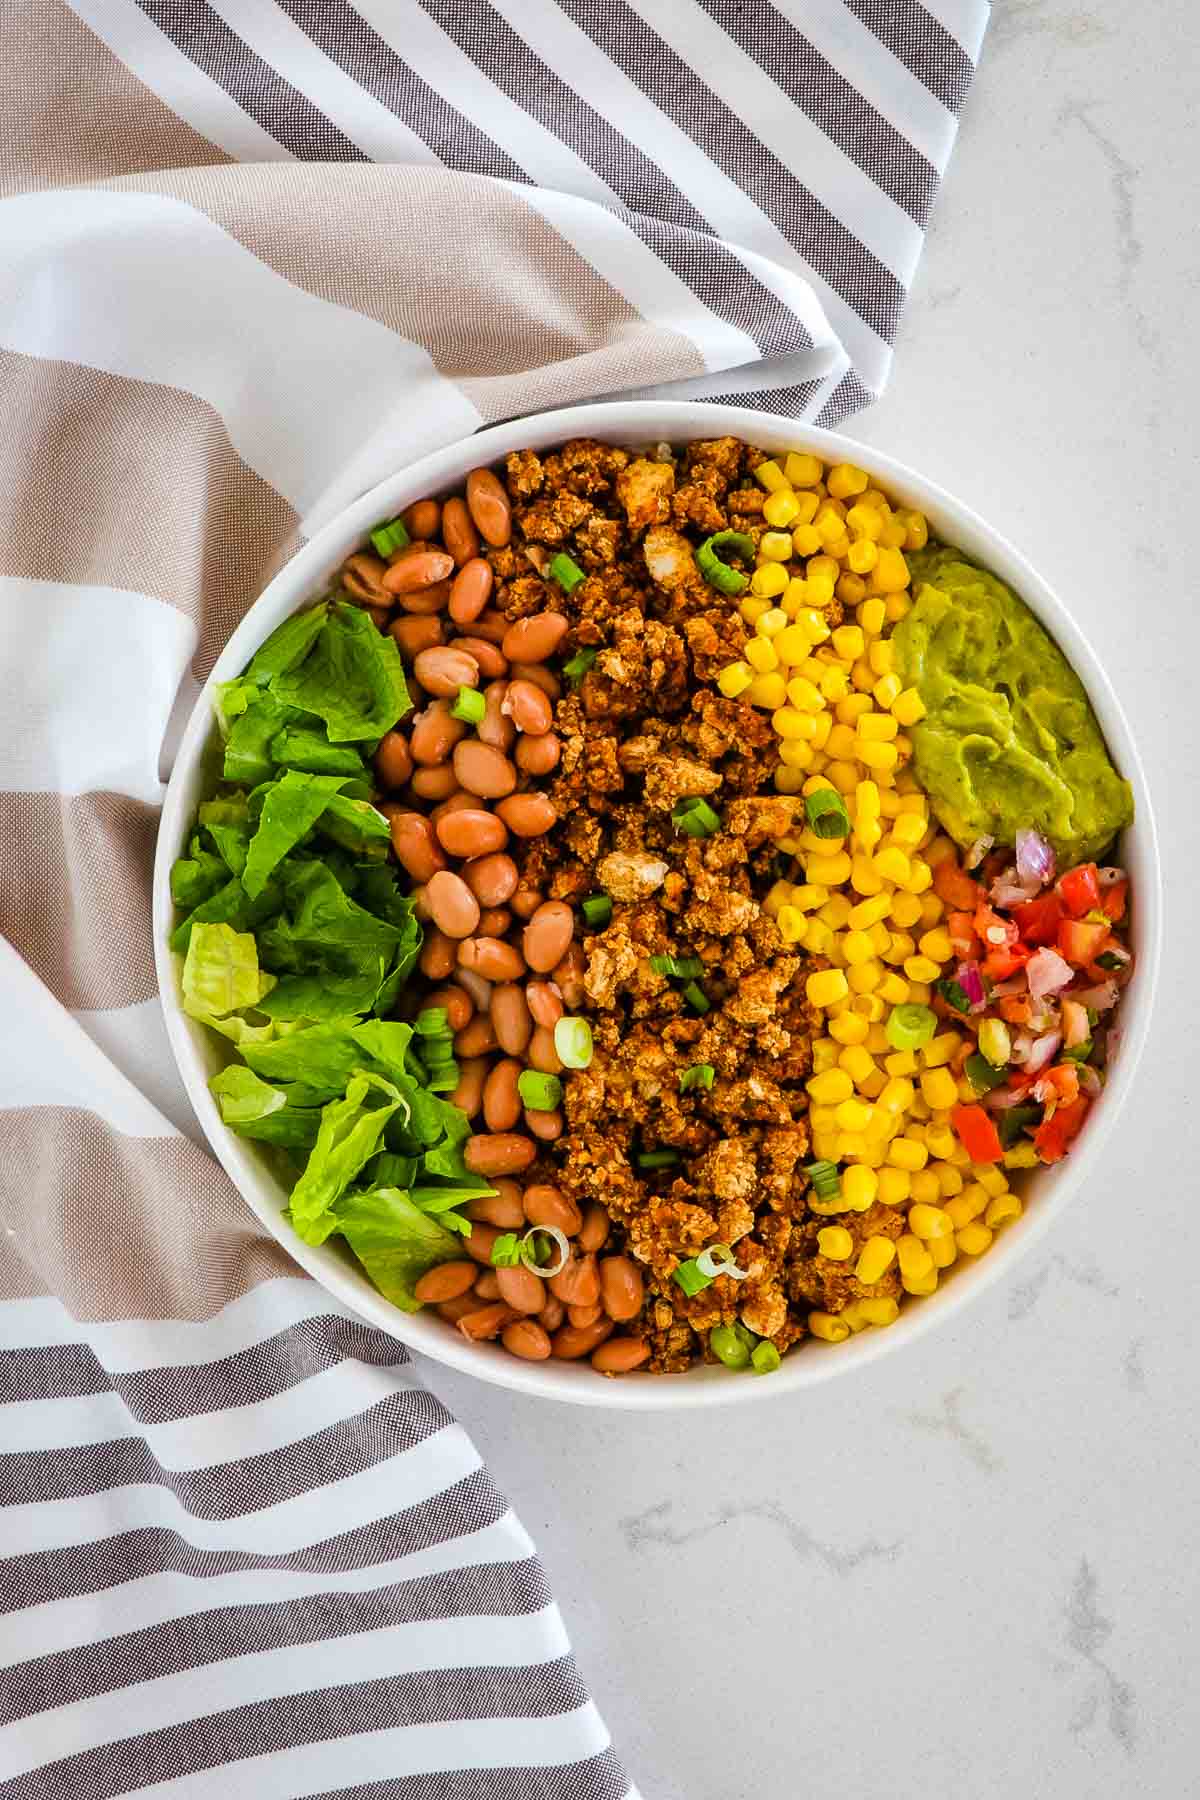 Sofritas bowl with romaine lettuce, pinto beans, corn, pico de gallo, guacamole, garnished with green onion.